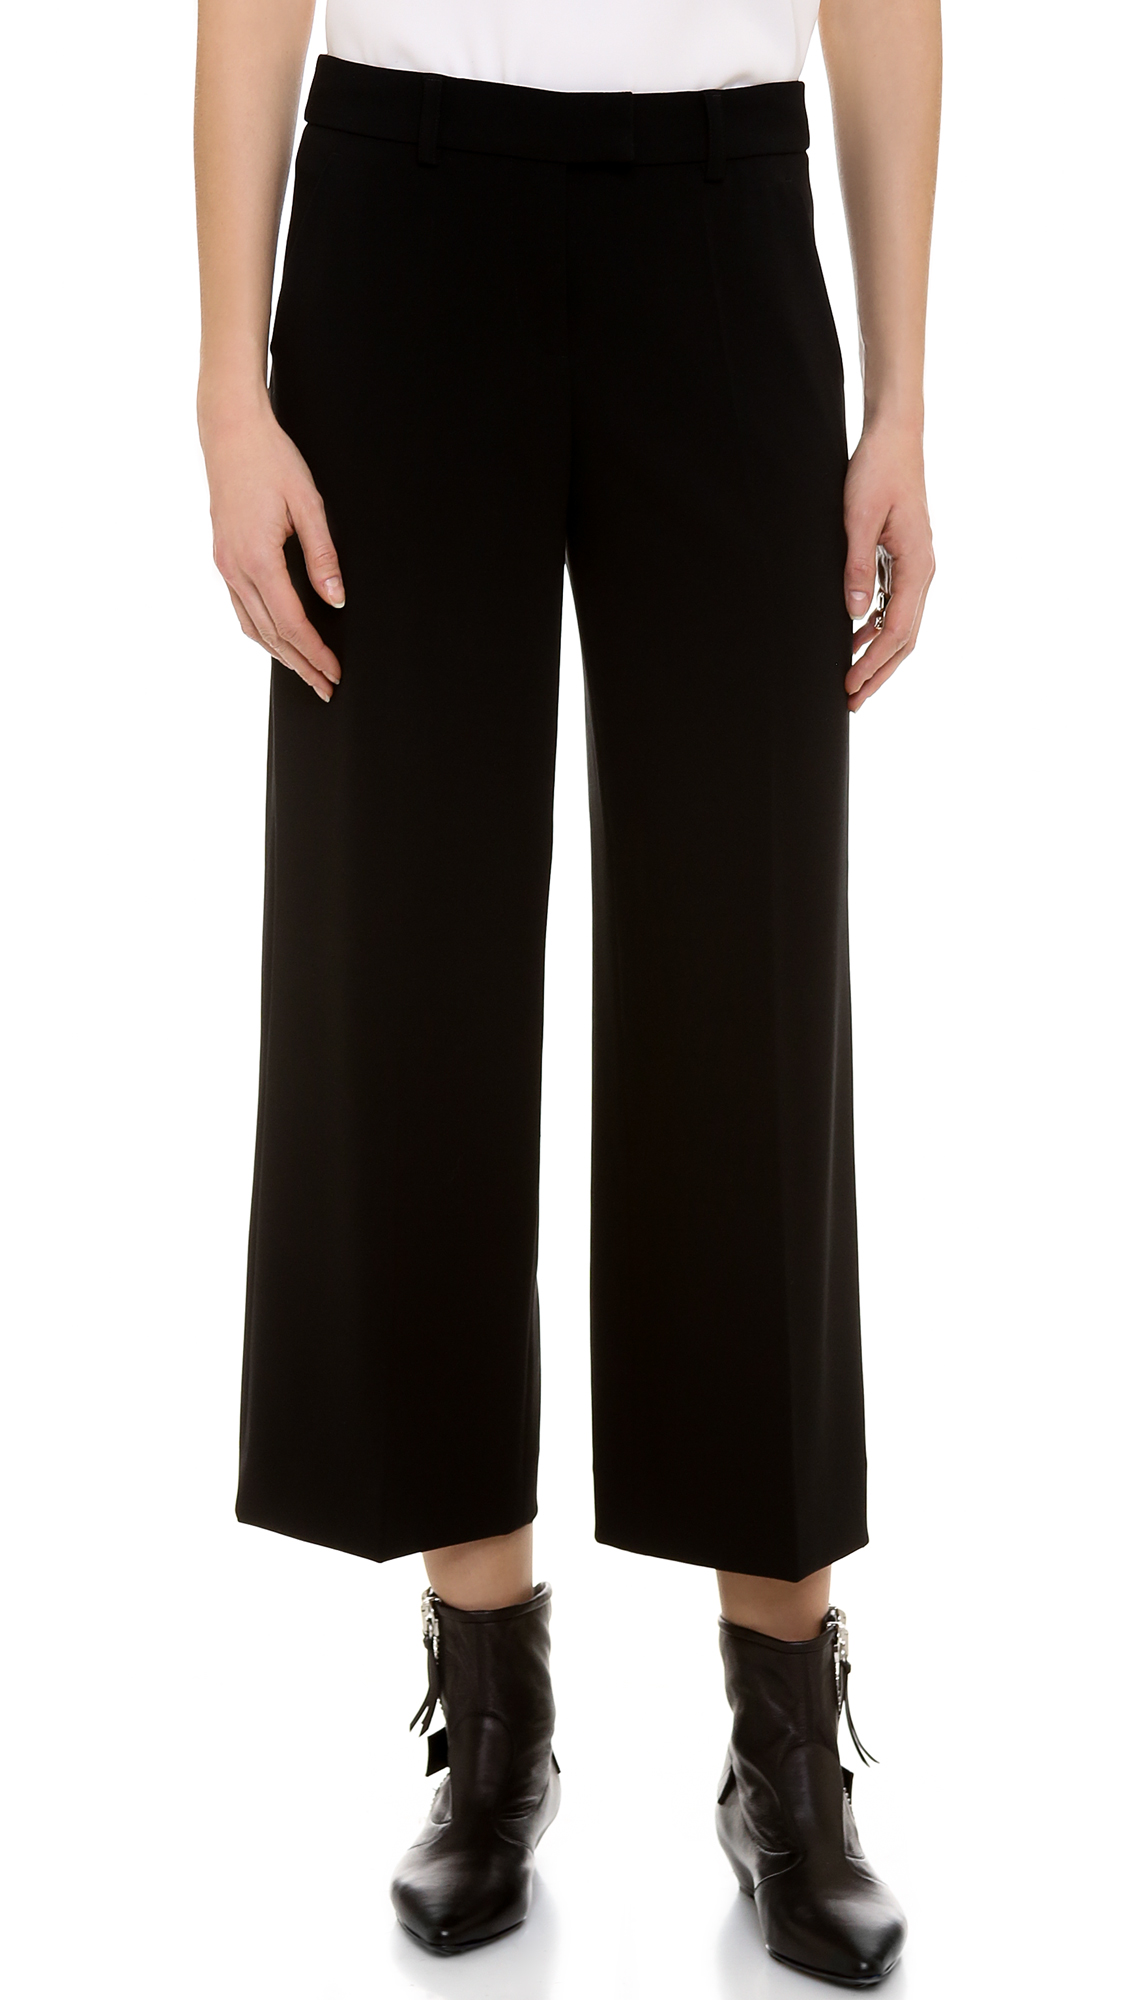 Lyst - Moschino Cheap and Chic Wide Leg Pants in Black